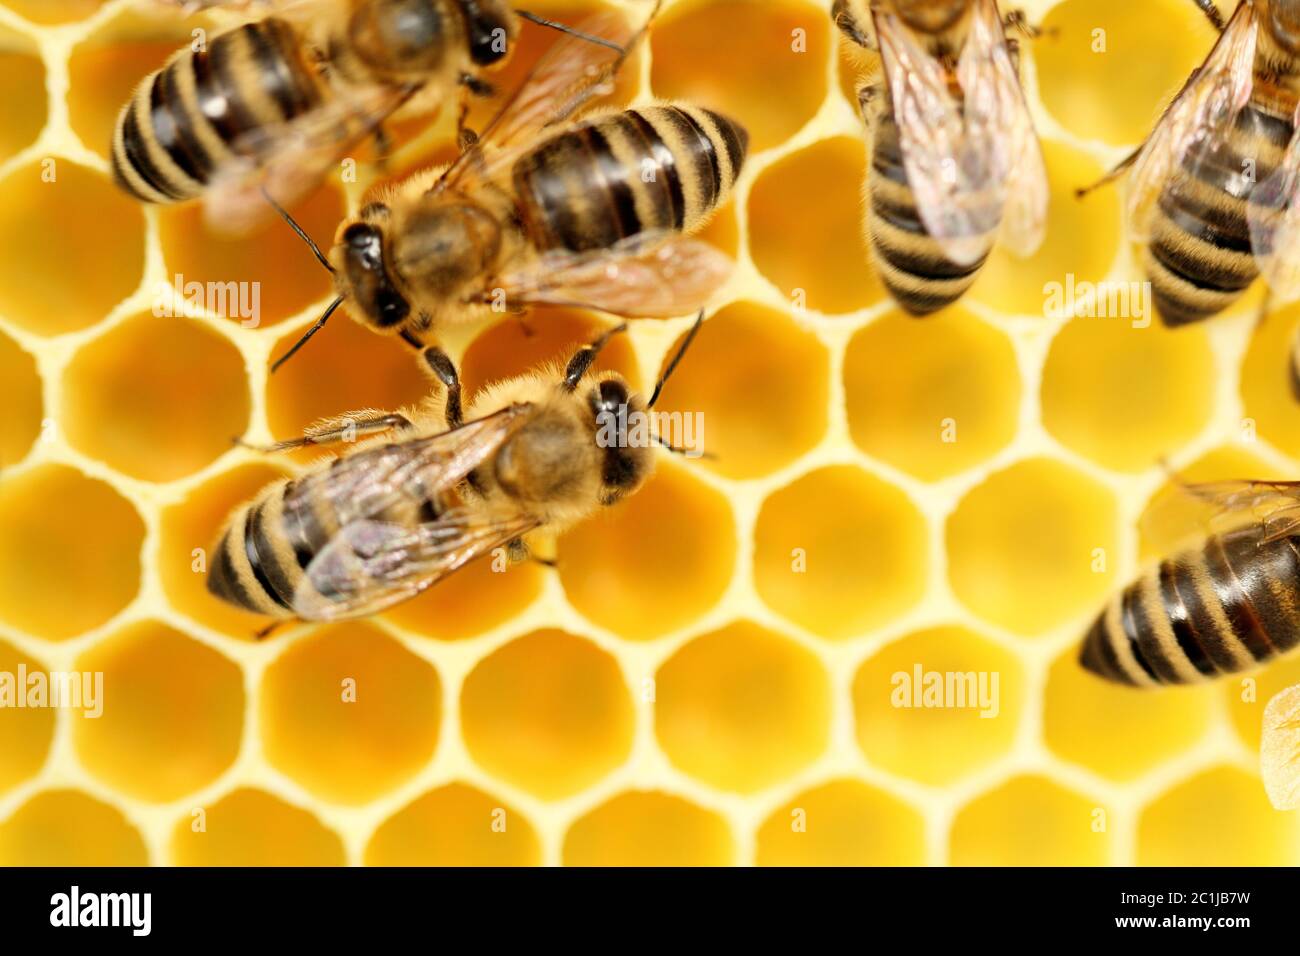 some working bees on a beeswax Stock Photo